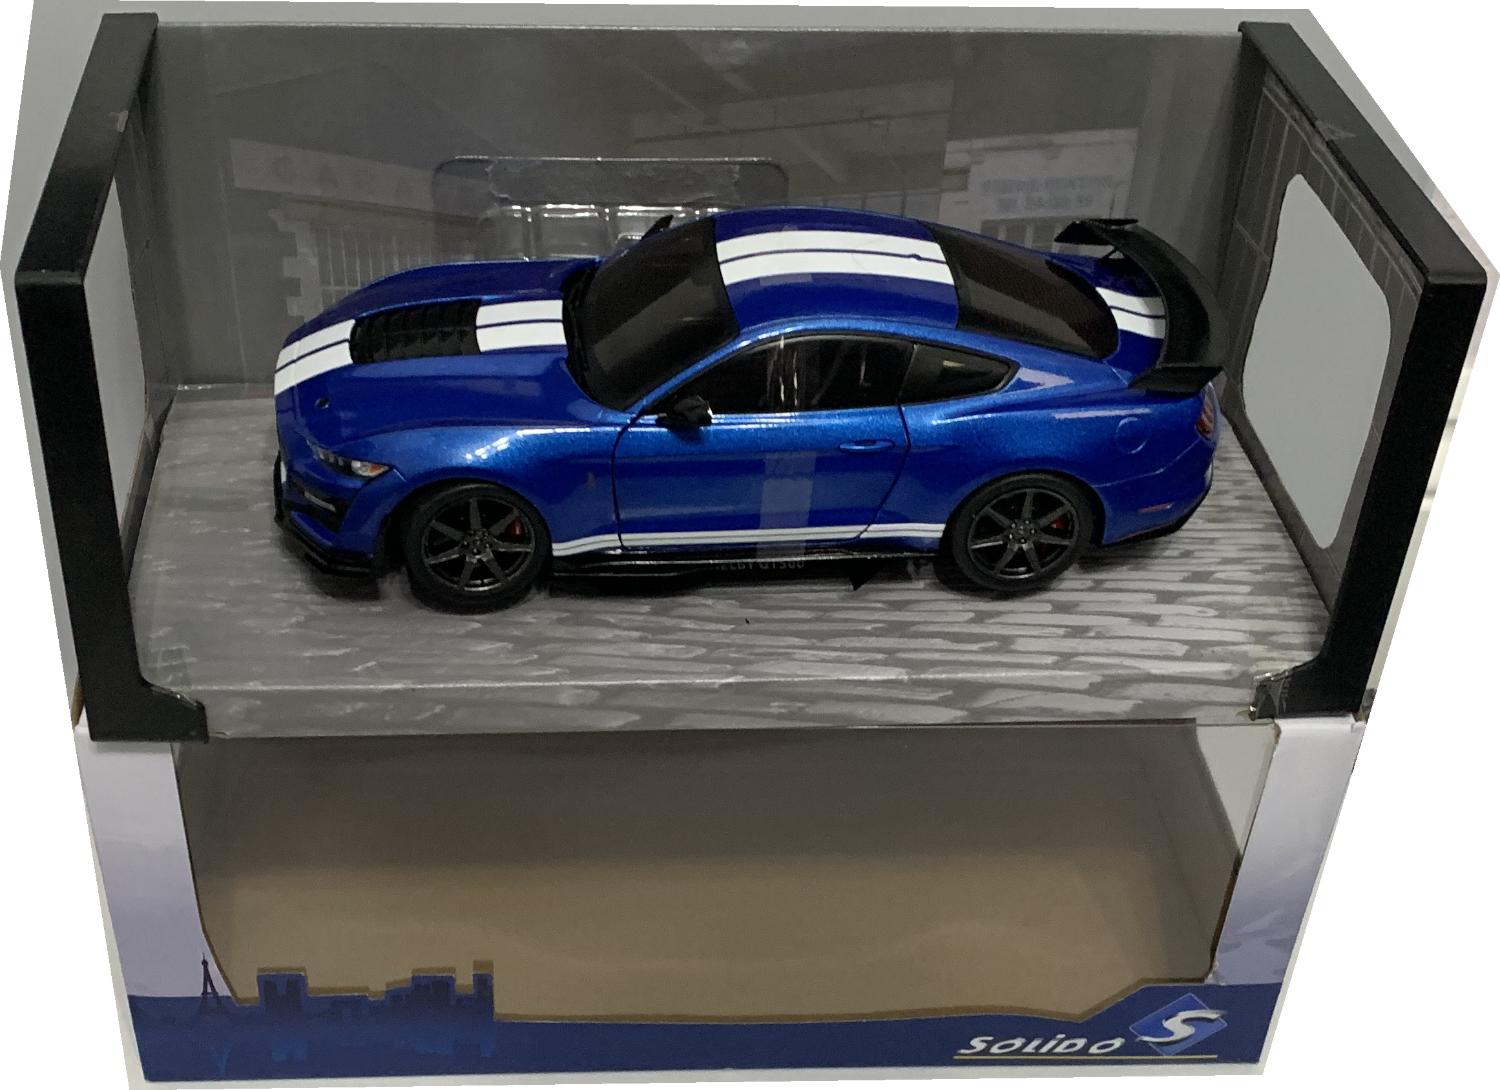 An excellent scale model of the Ford Mustang Shelby GT500 Fast Track with high level of detail throughout, all authentically recreated.  Model is presented in a window display box.  The car is approx. 26 cm long and the presentation box is 34 cm long